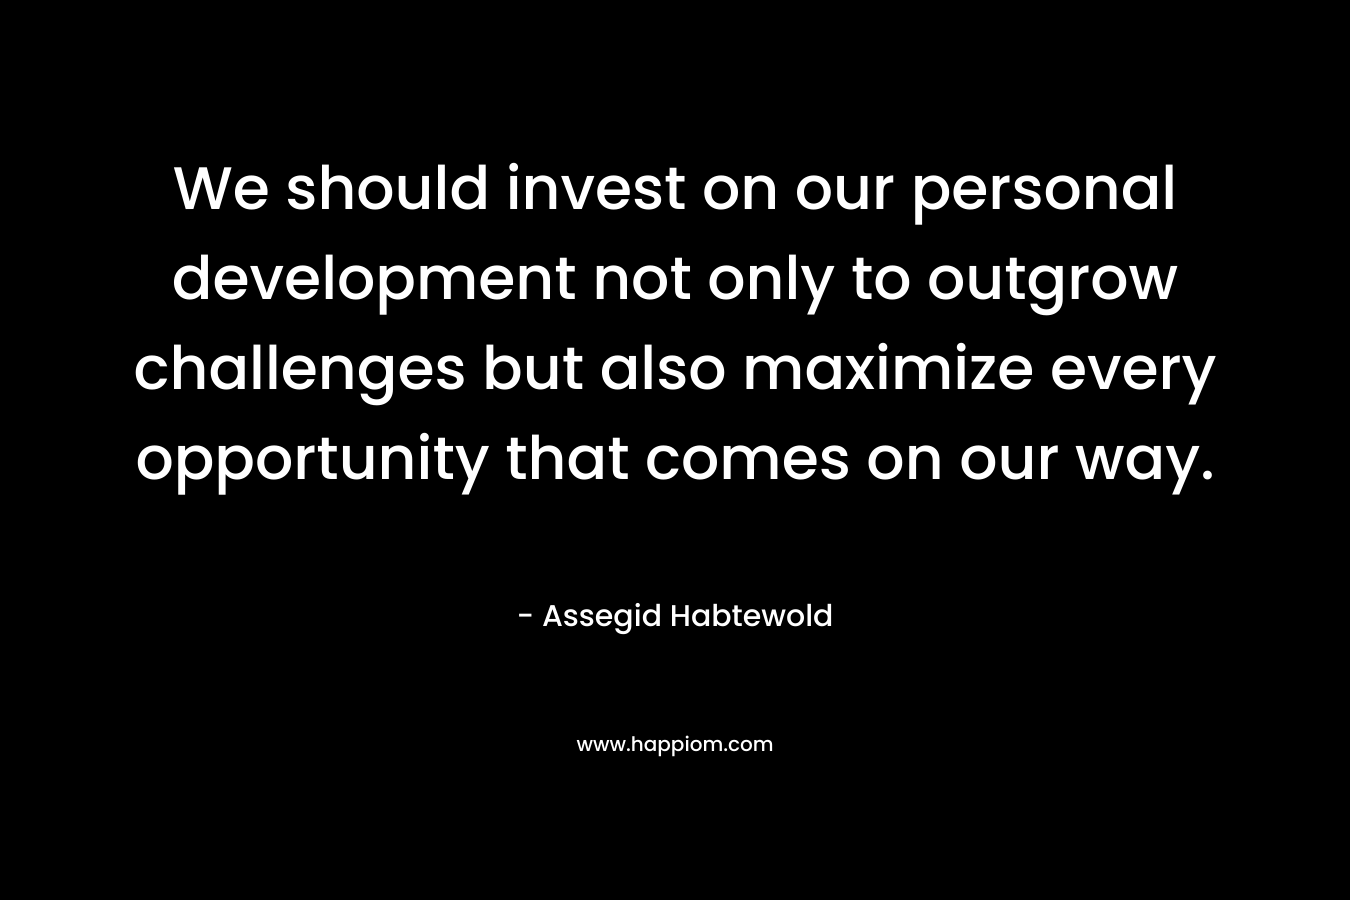 We should invest on our personal development not only to outgrow challenges but also maximize every opportunity that comes on our way.